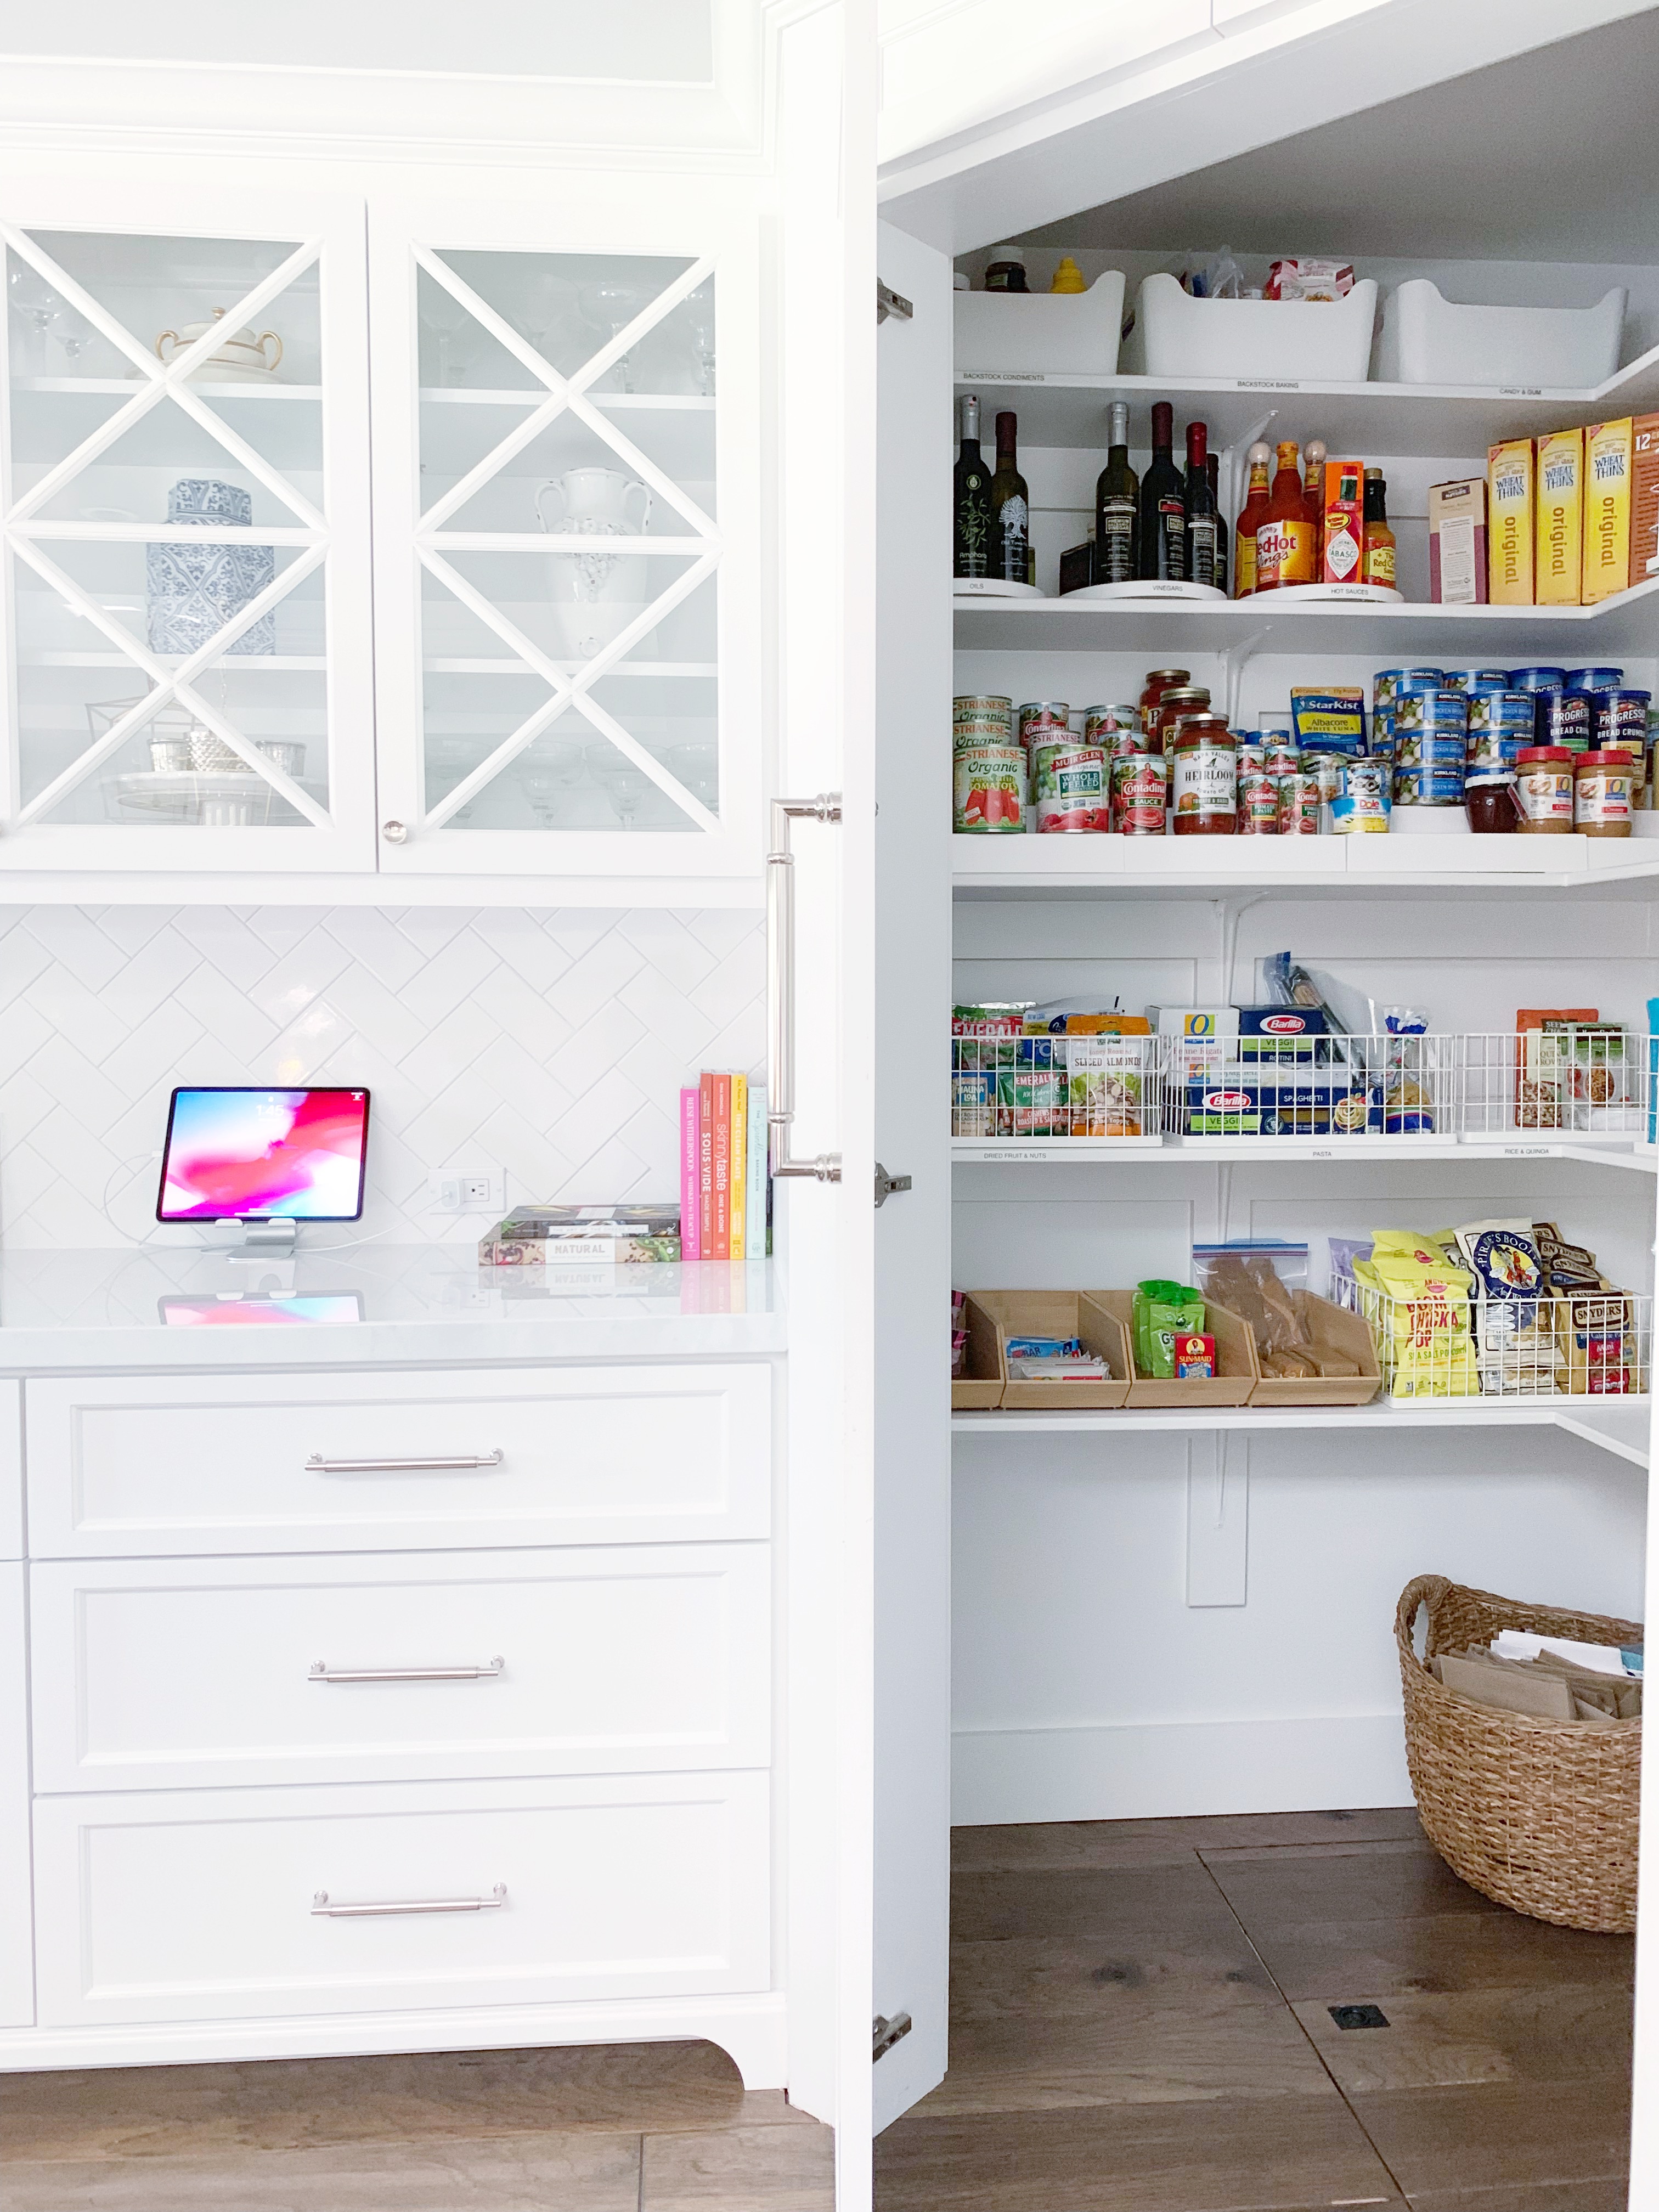 Simple Pantry Wall Cabinet Ideas to Make the Most Out of Any Space